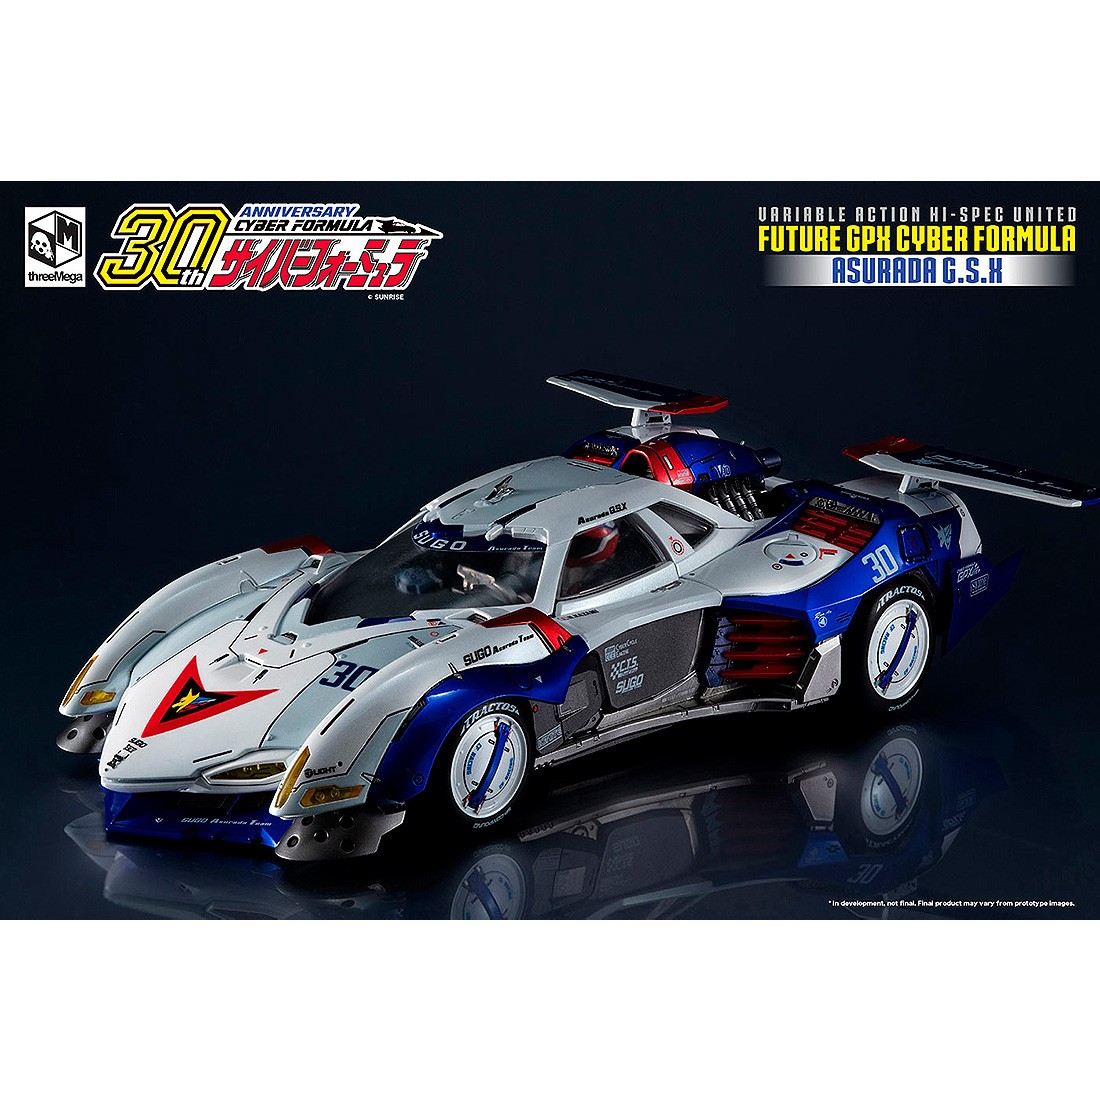 MegaHouse Variable Action Hi-SPEC UNITED Future GPX Cyber Formula 